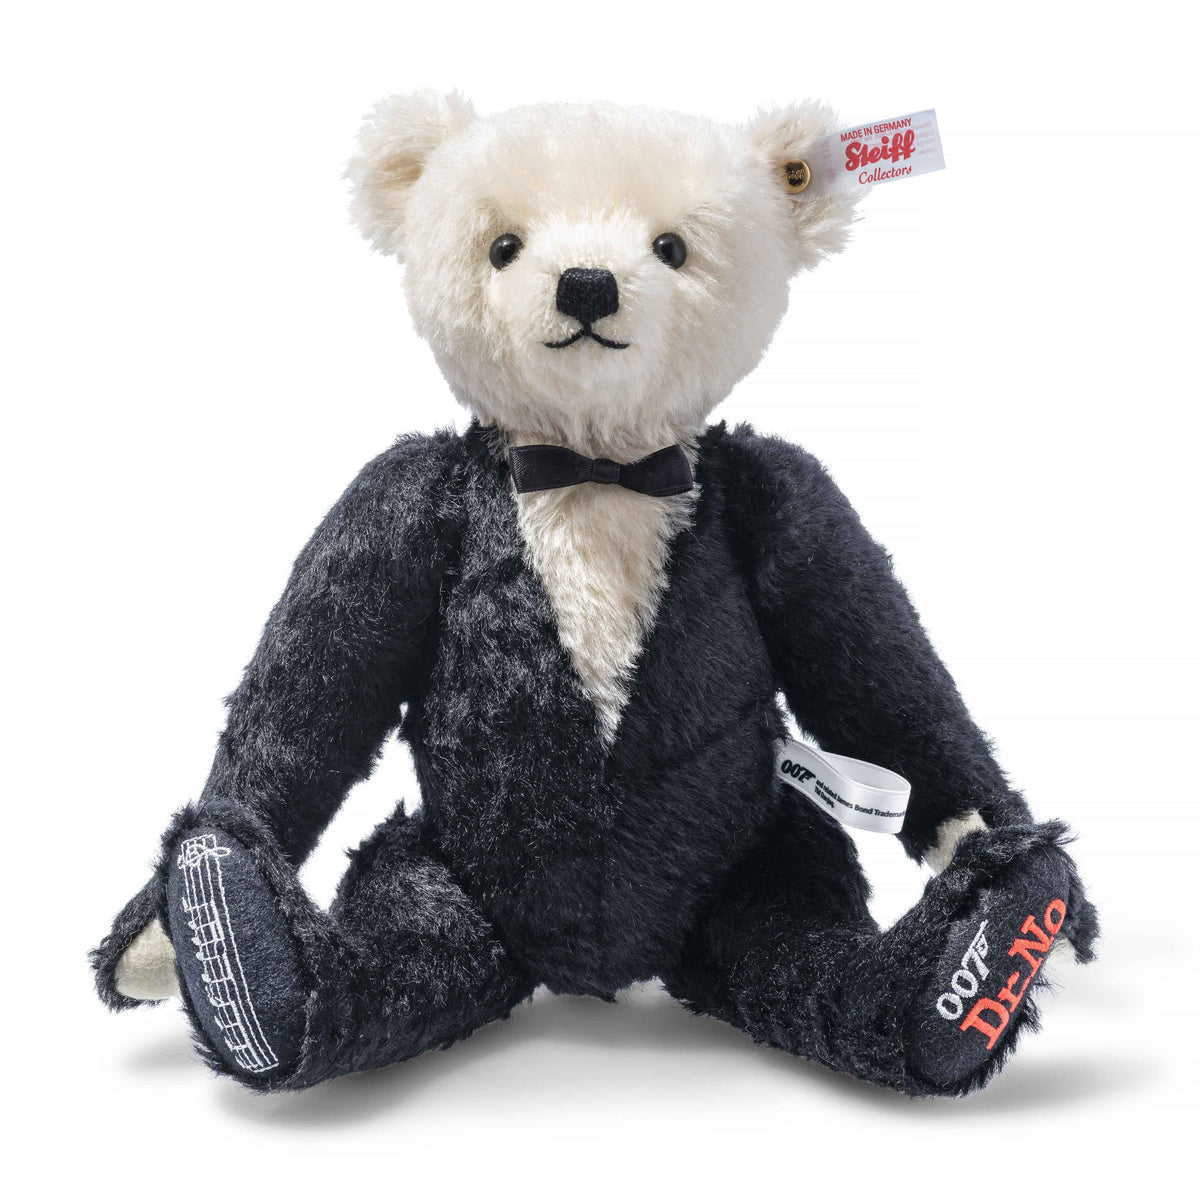 James Bond Musical Teddy Bear - Dr. No Numbered Edition - By Steiff